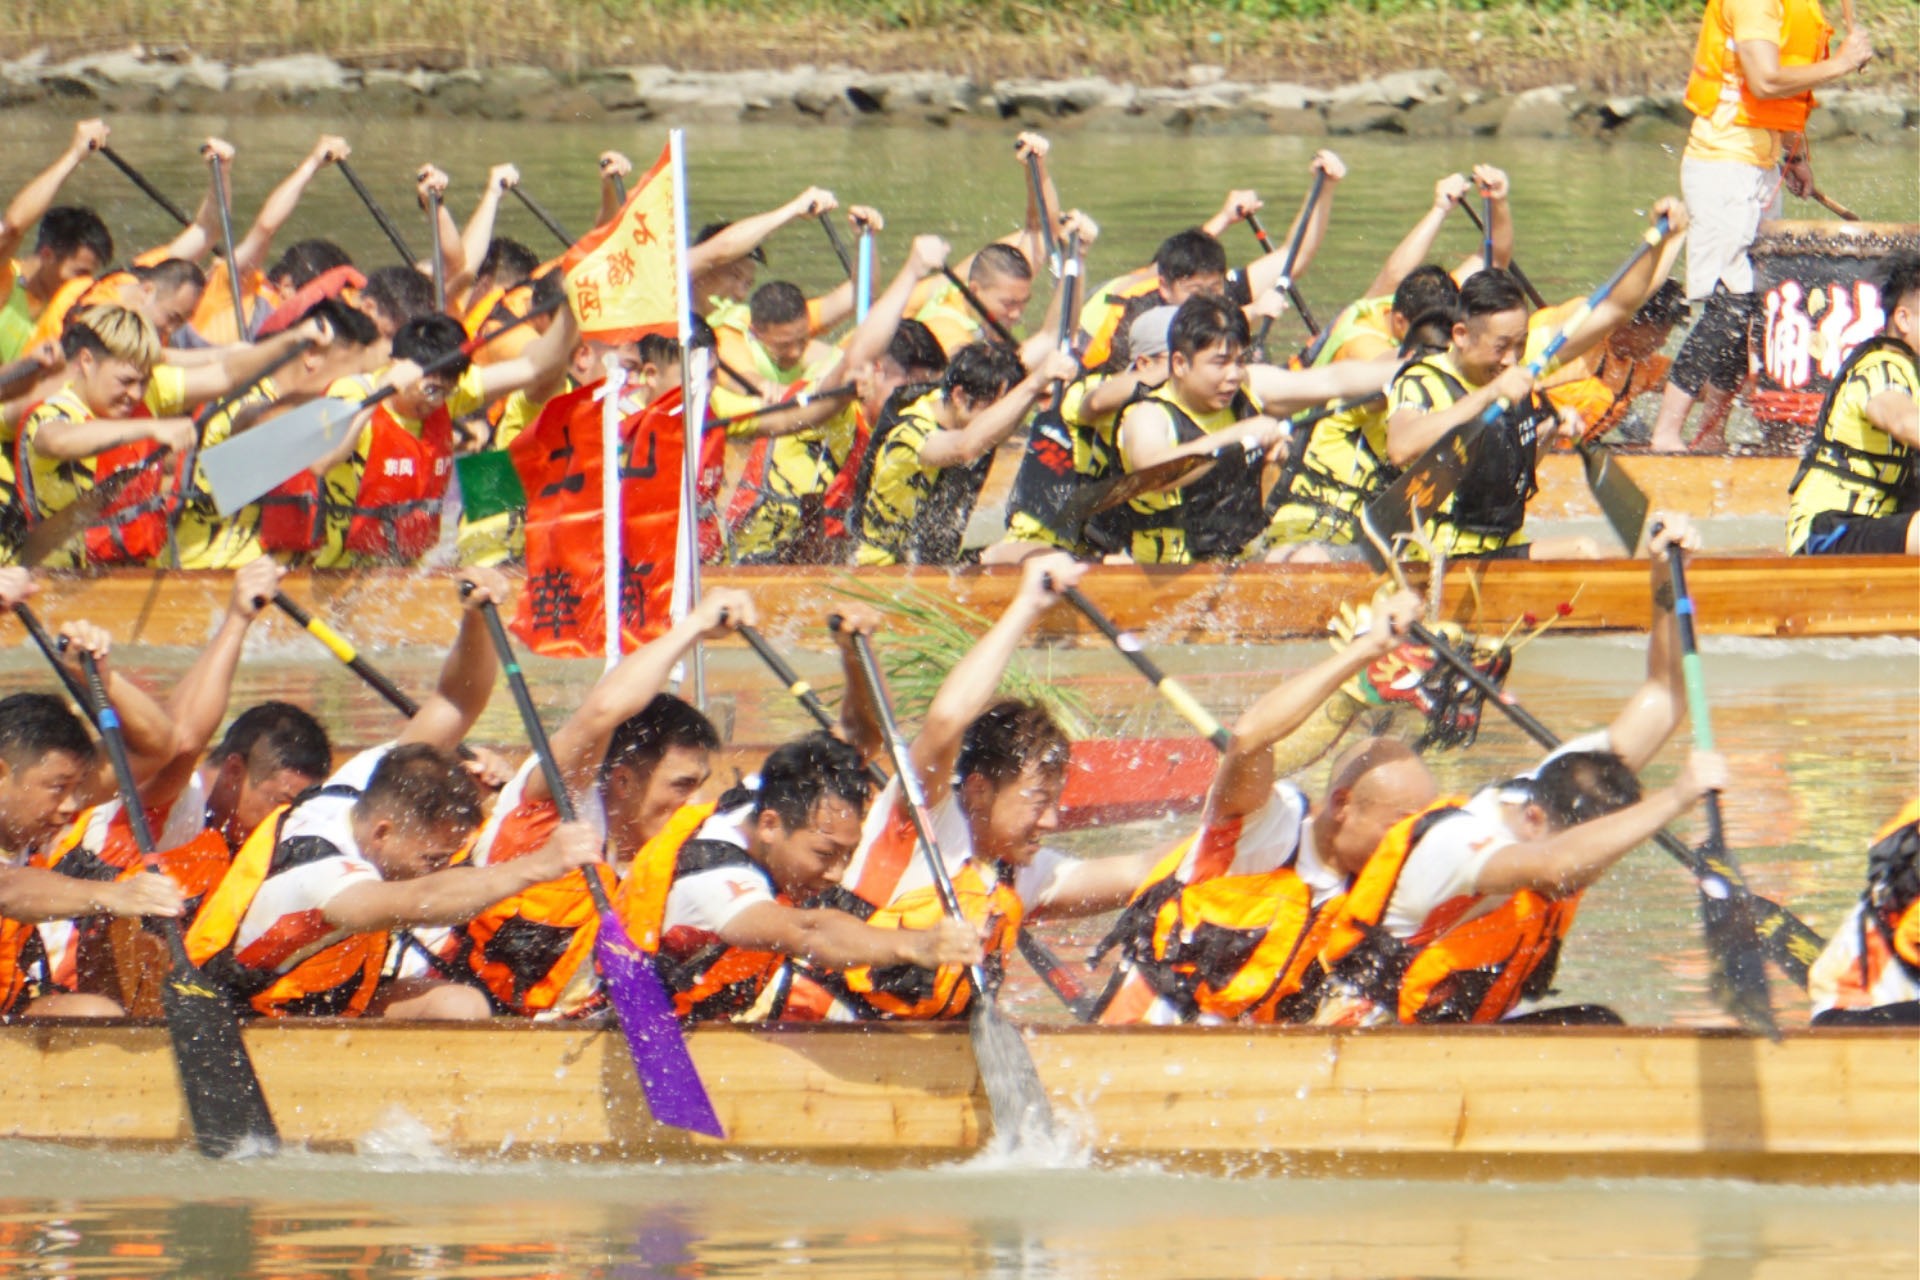 Here's Your Last Chance to Dragon Boat Race in Shenzhen